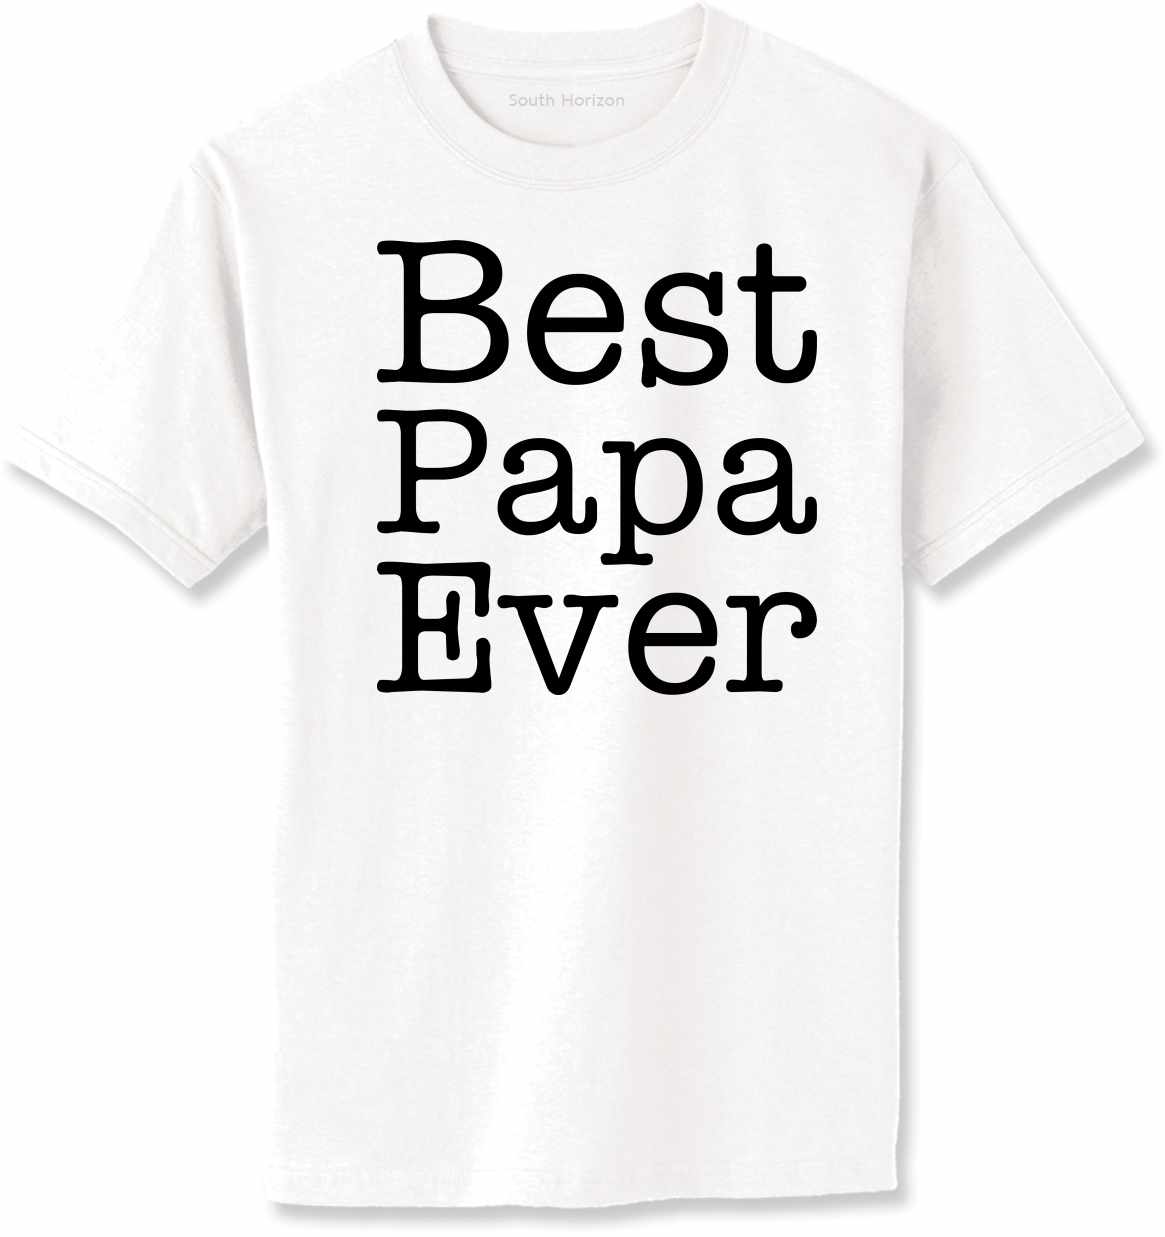 Best Papa Ever on Adult T-Shirt (#872-1)